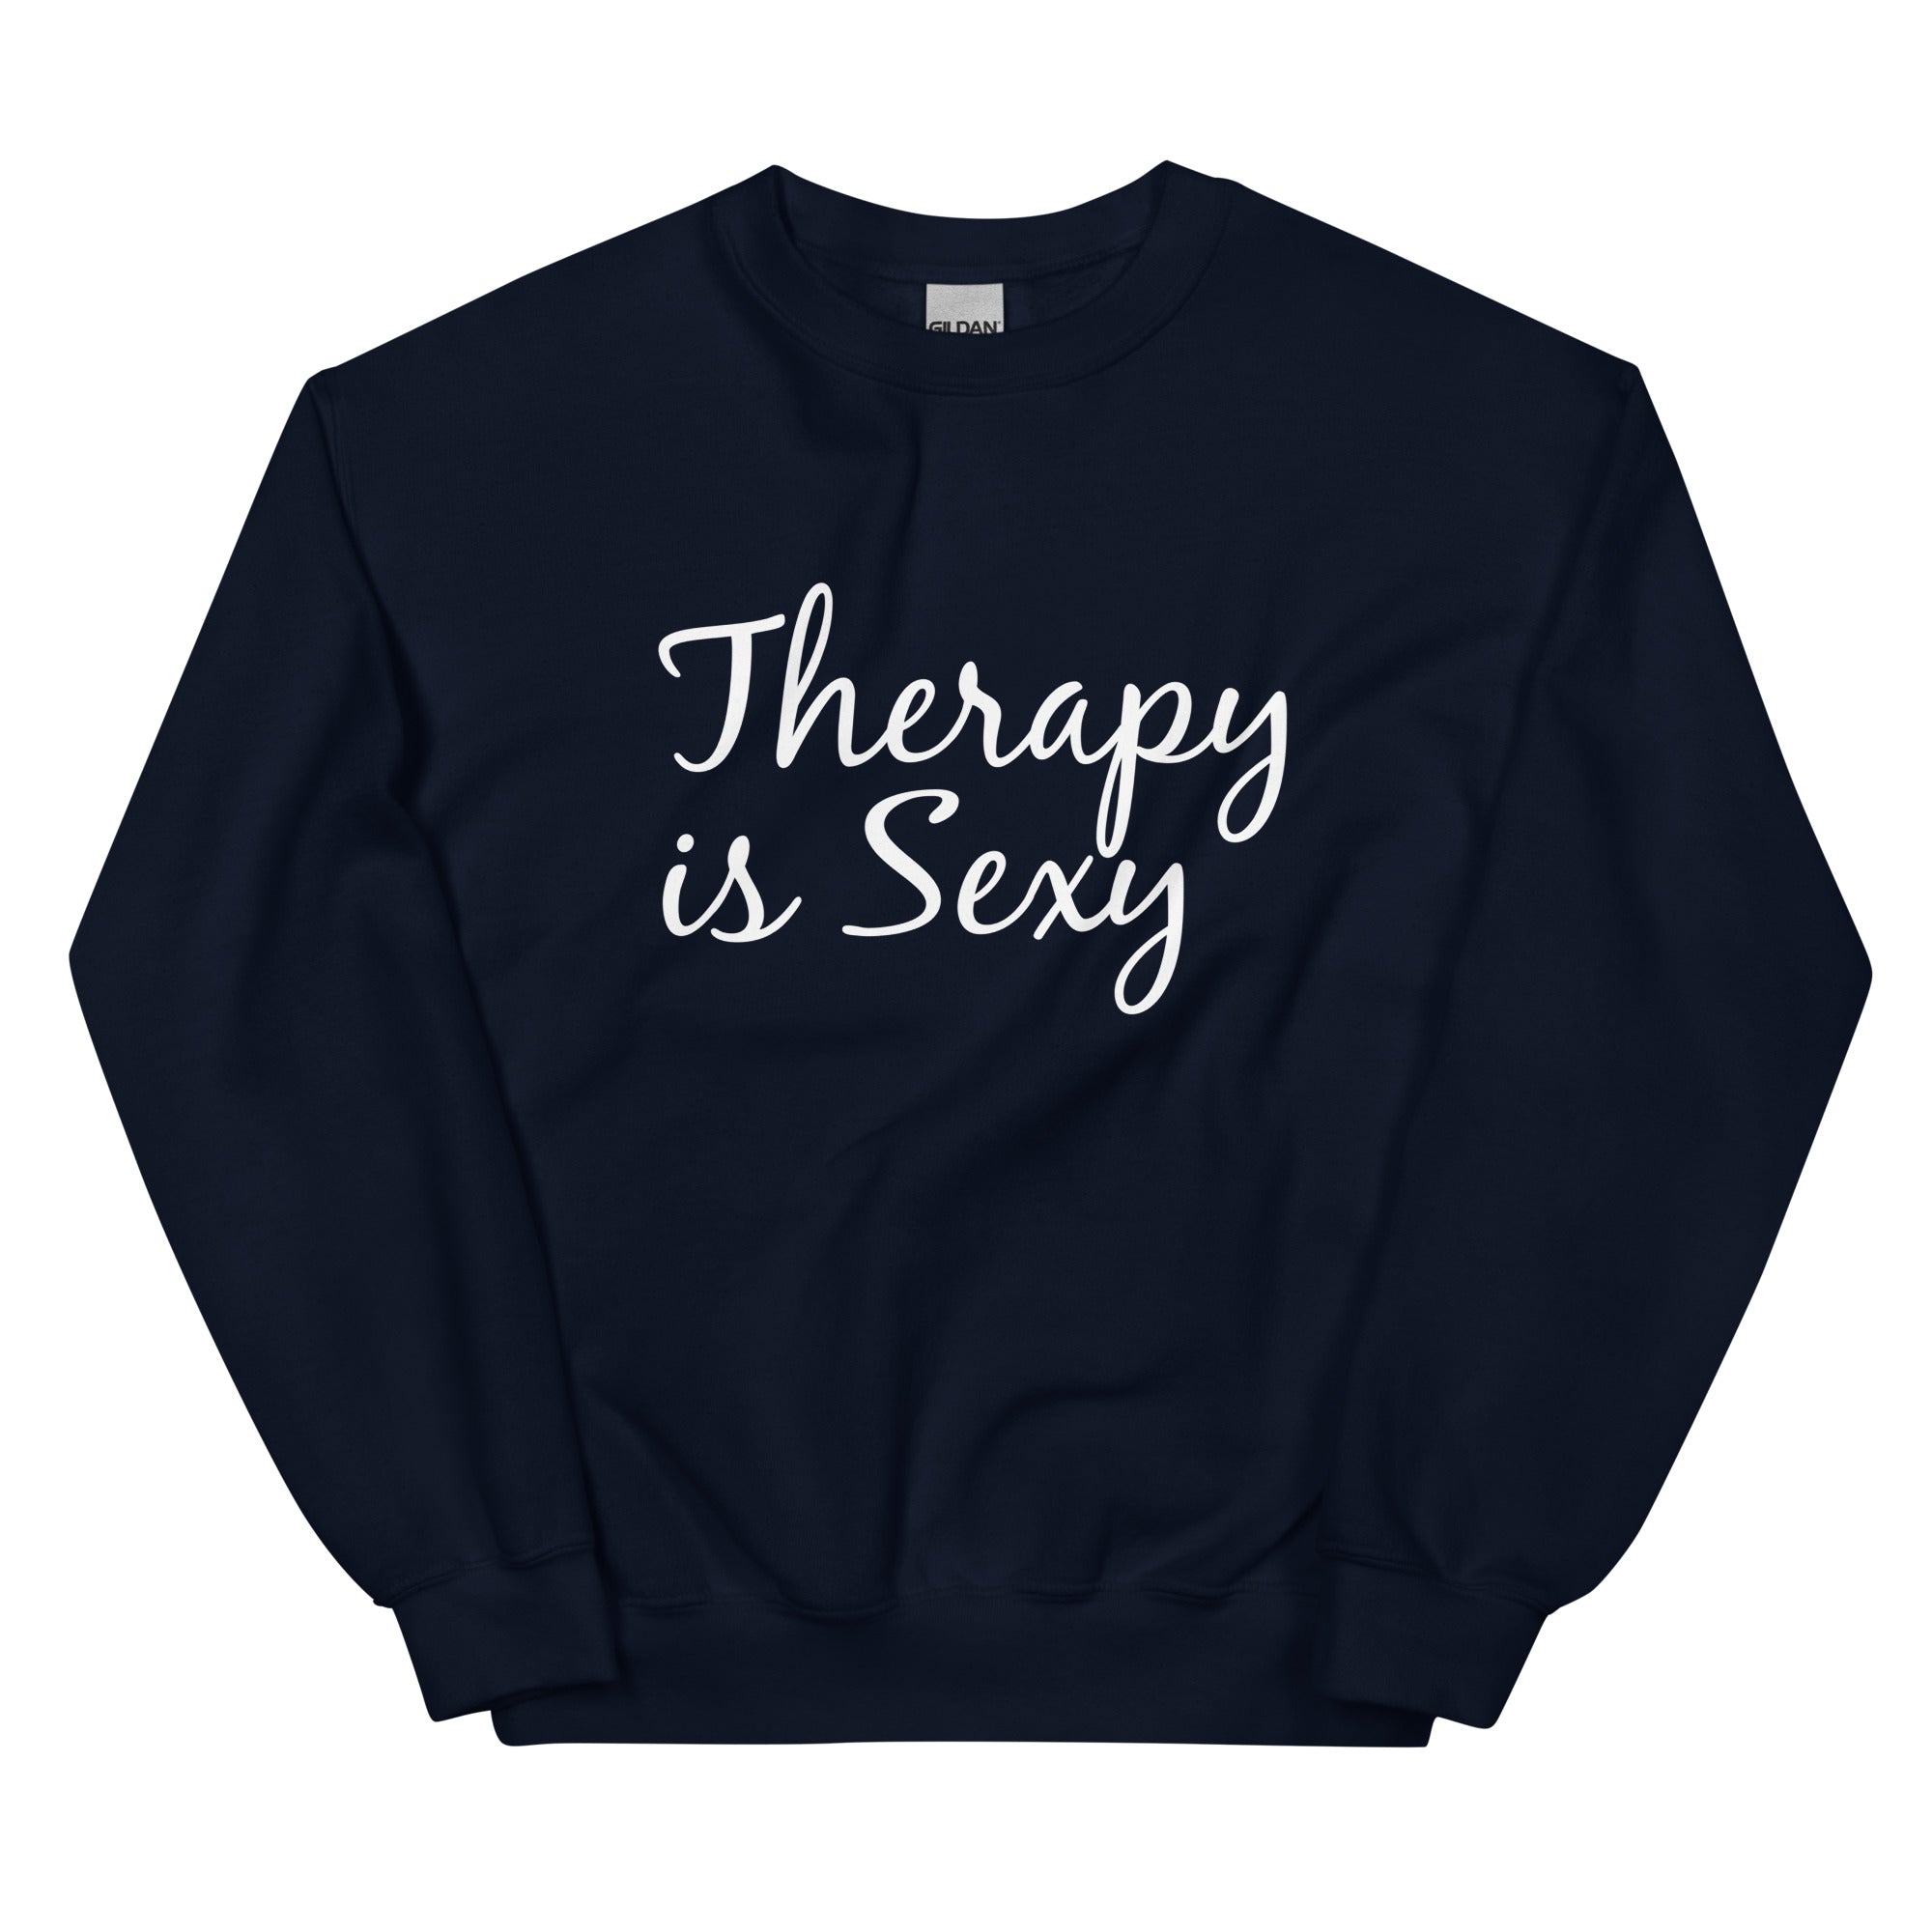 Therapy is Sexy Navy Crew neck by Carly Lind